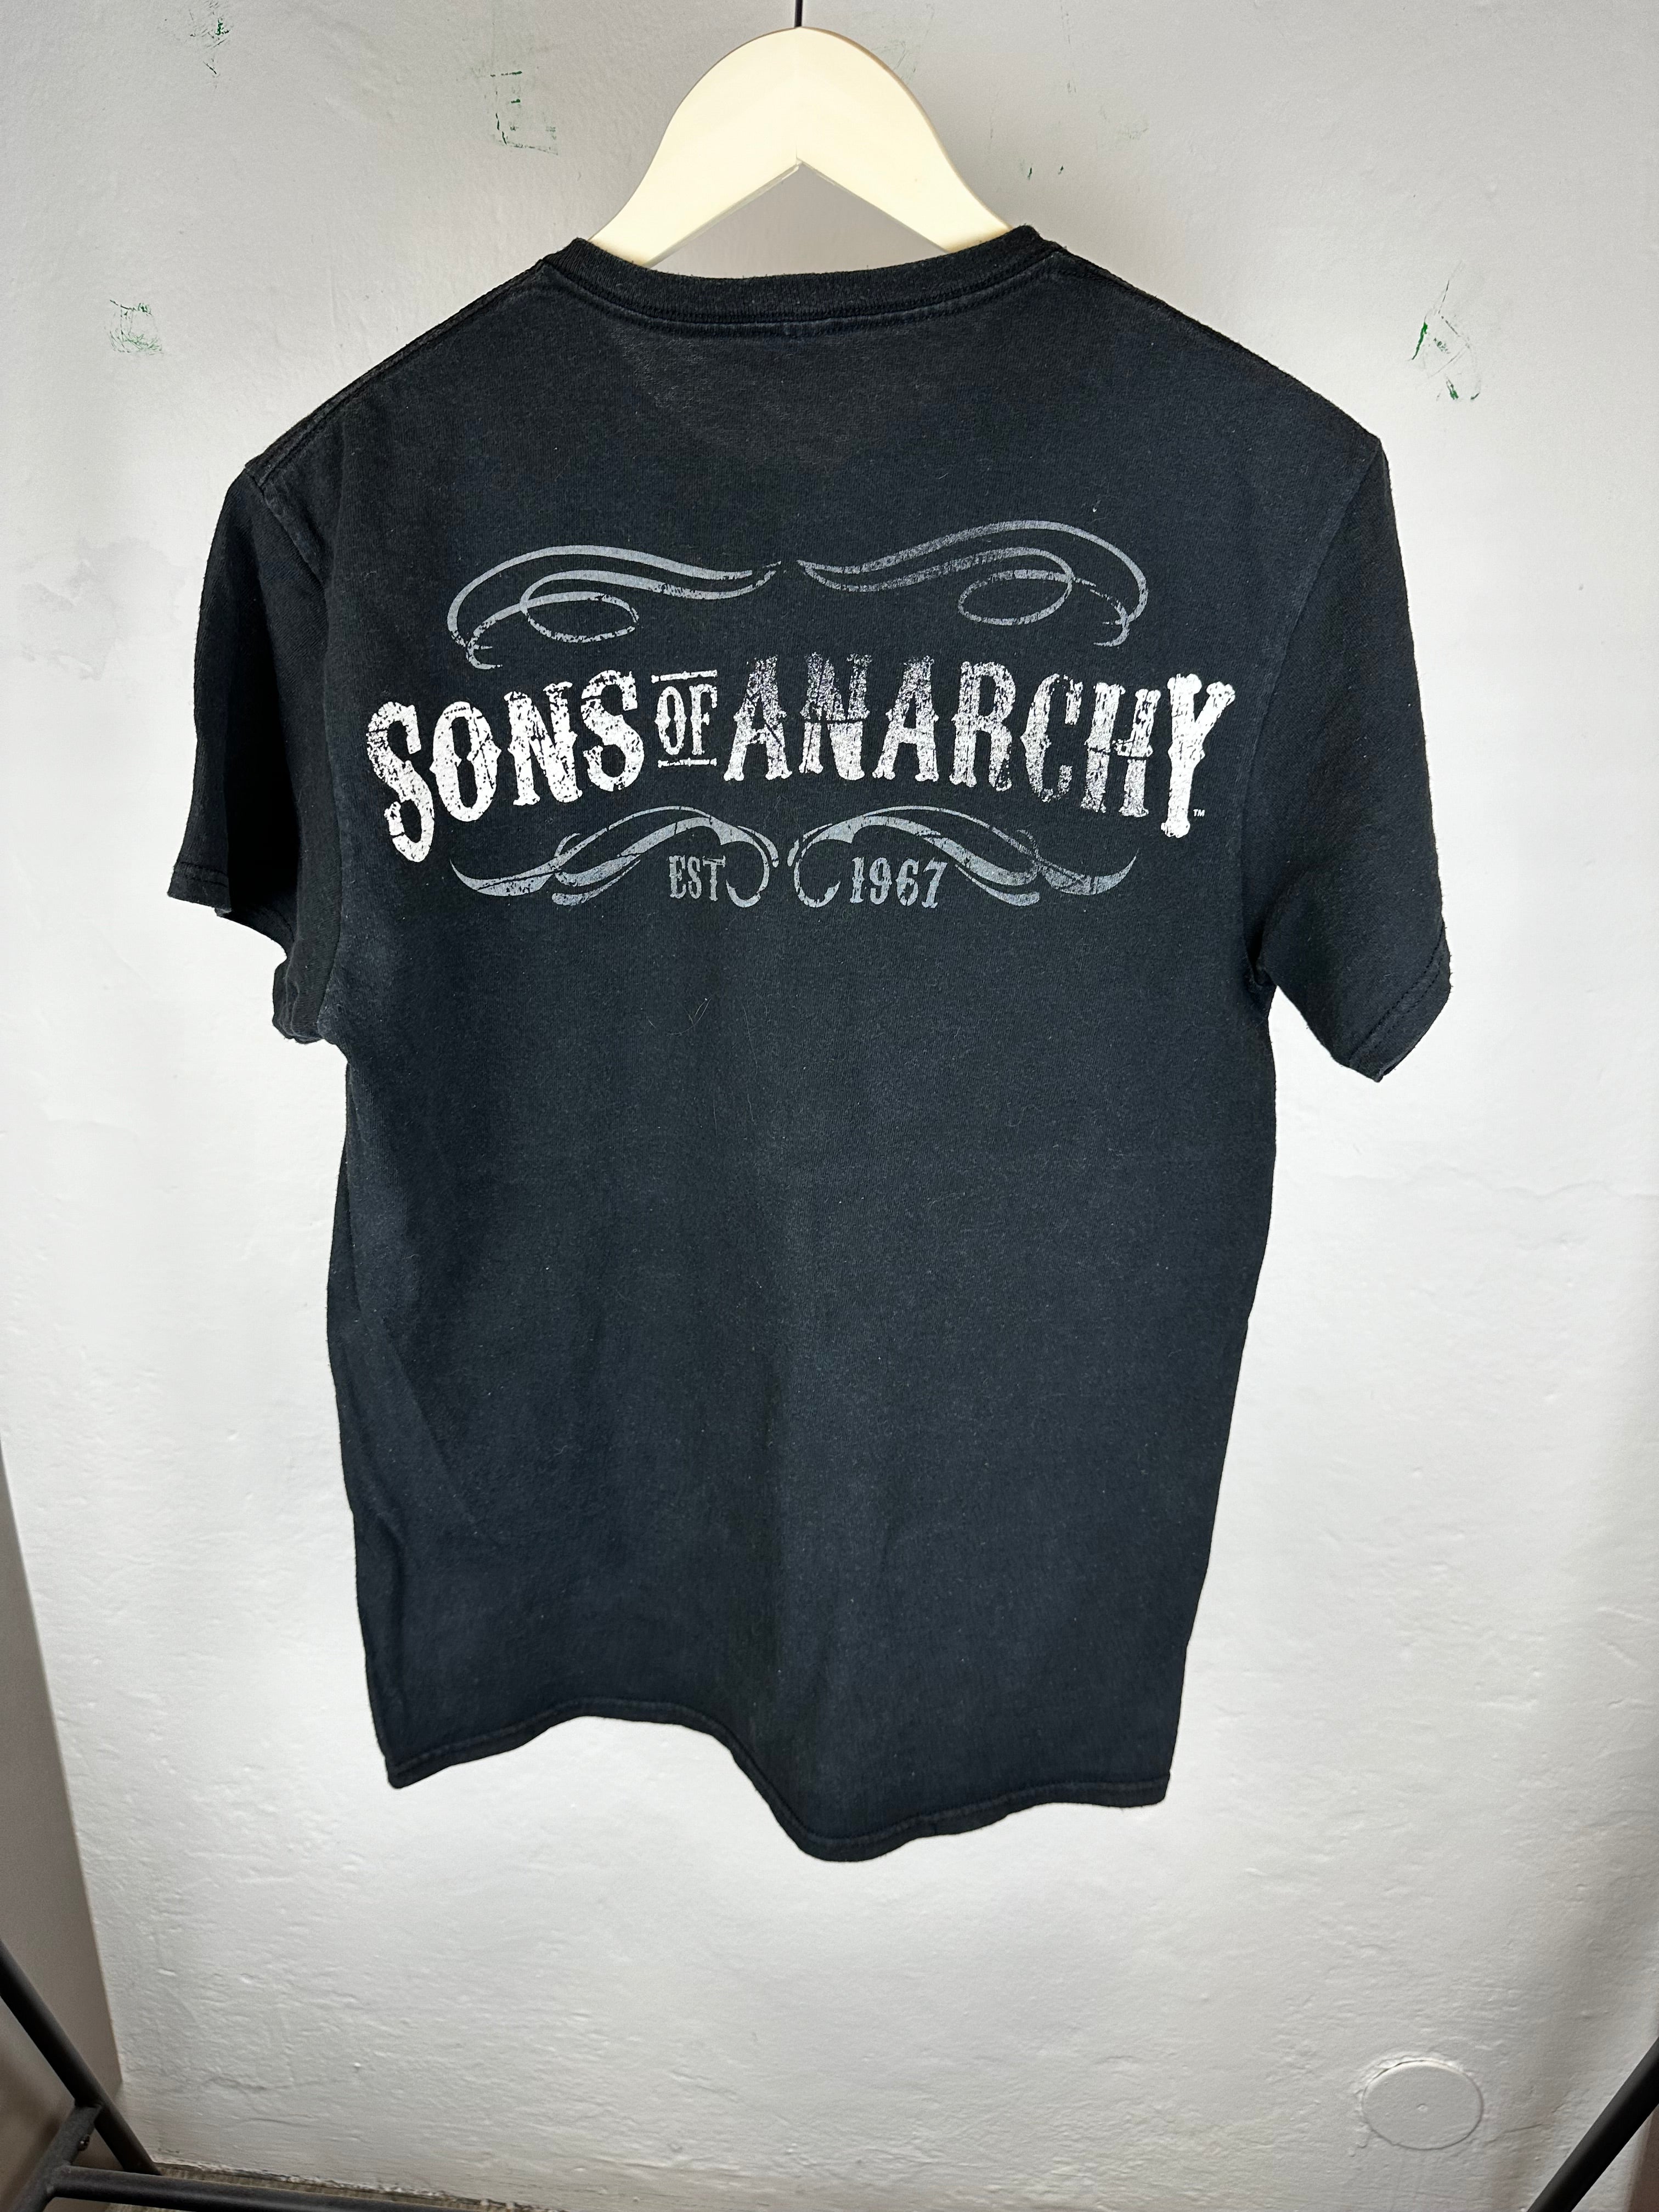 Vintage Sons of Anarchy t-shirt - size L